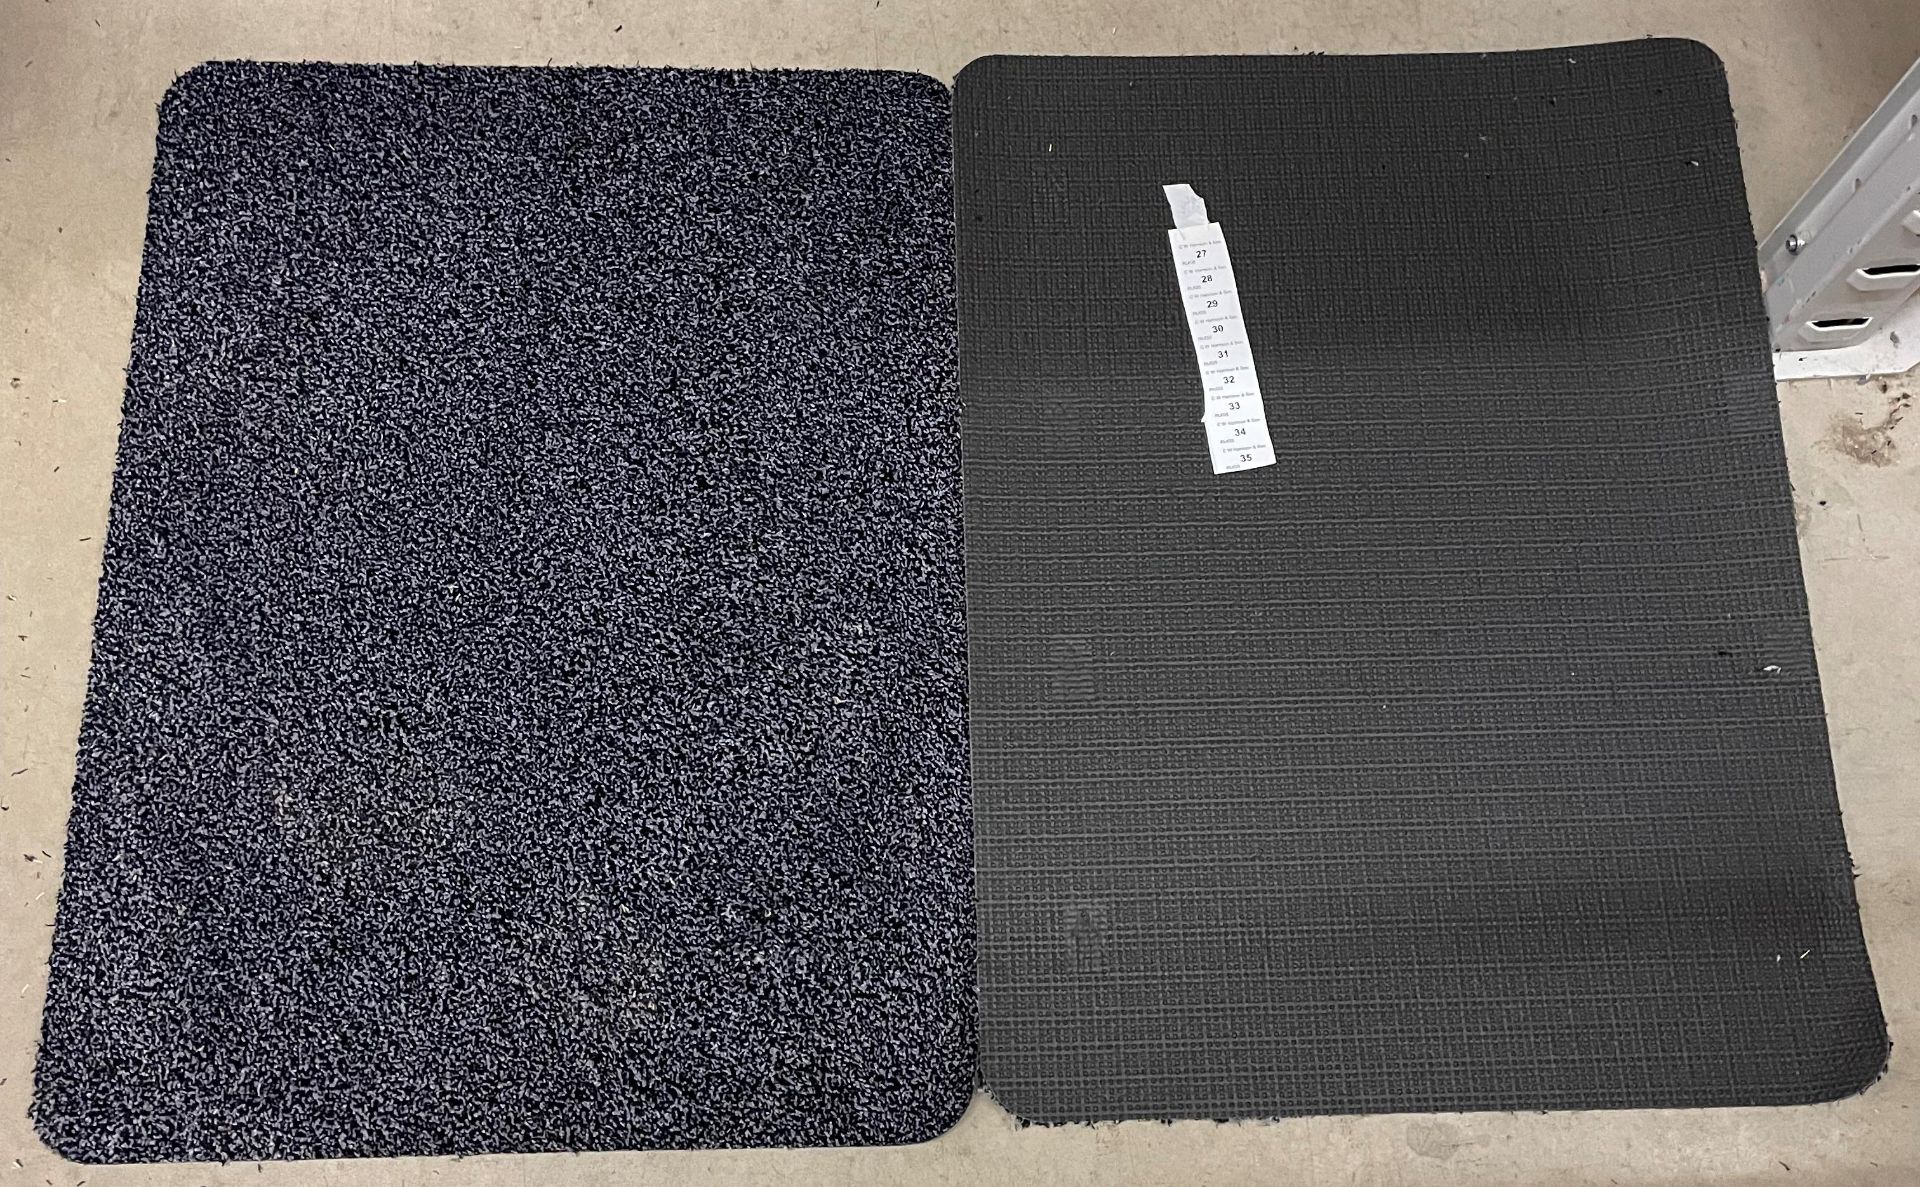 20 x black speckled rubber backed mats - 60 x 80cm